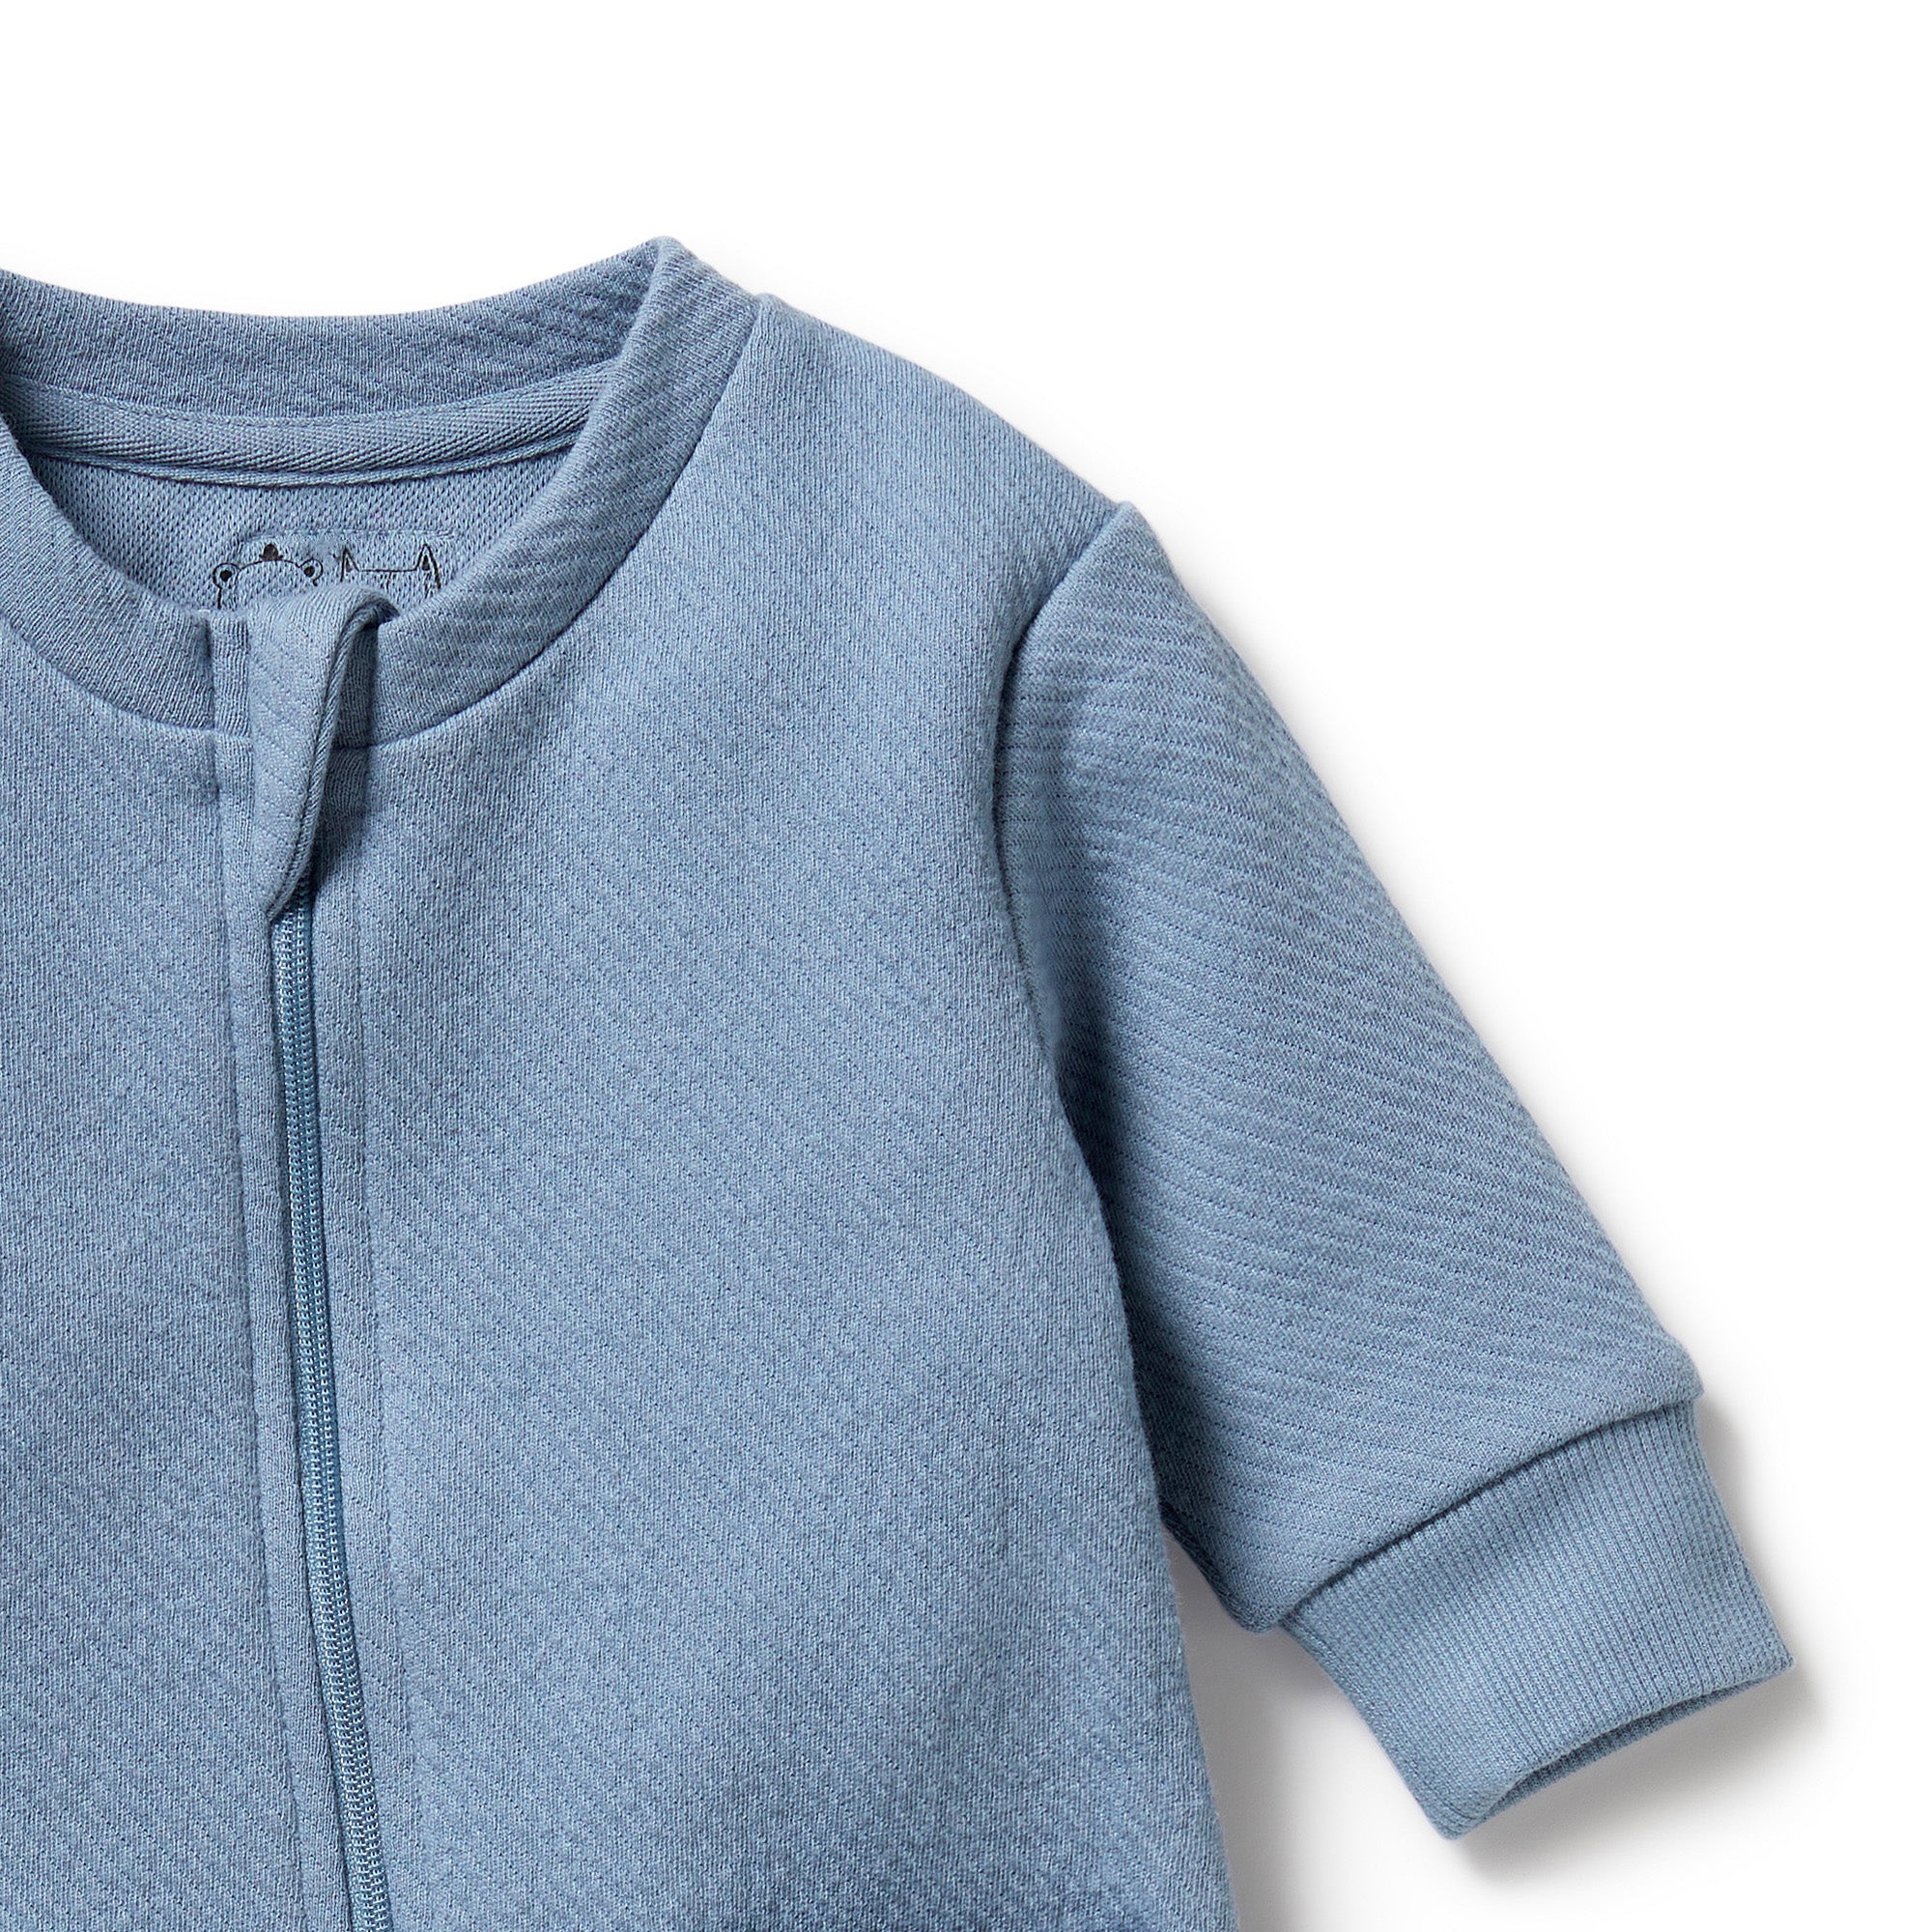 Wilson & Frenchy Storm Blue Organic Quilted Growsuit